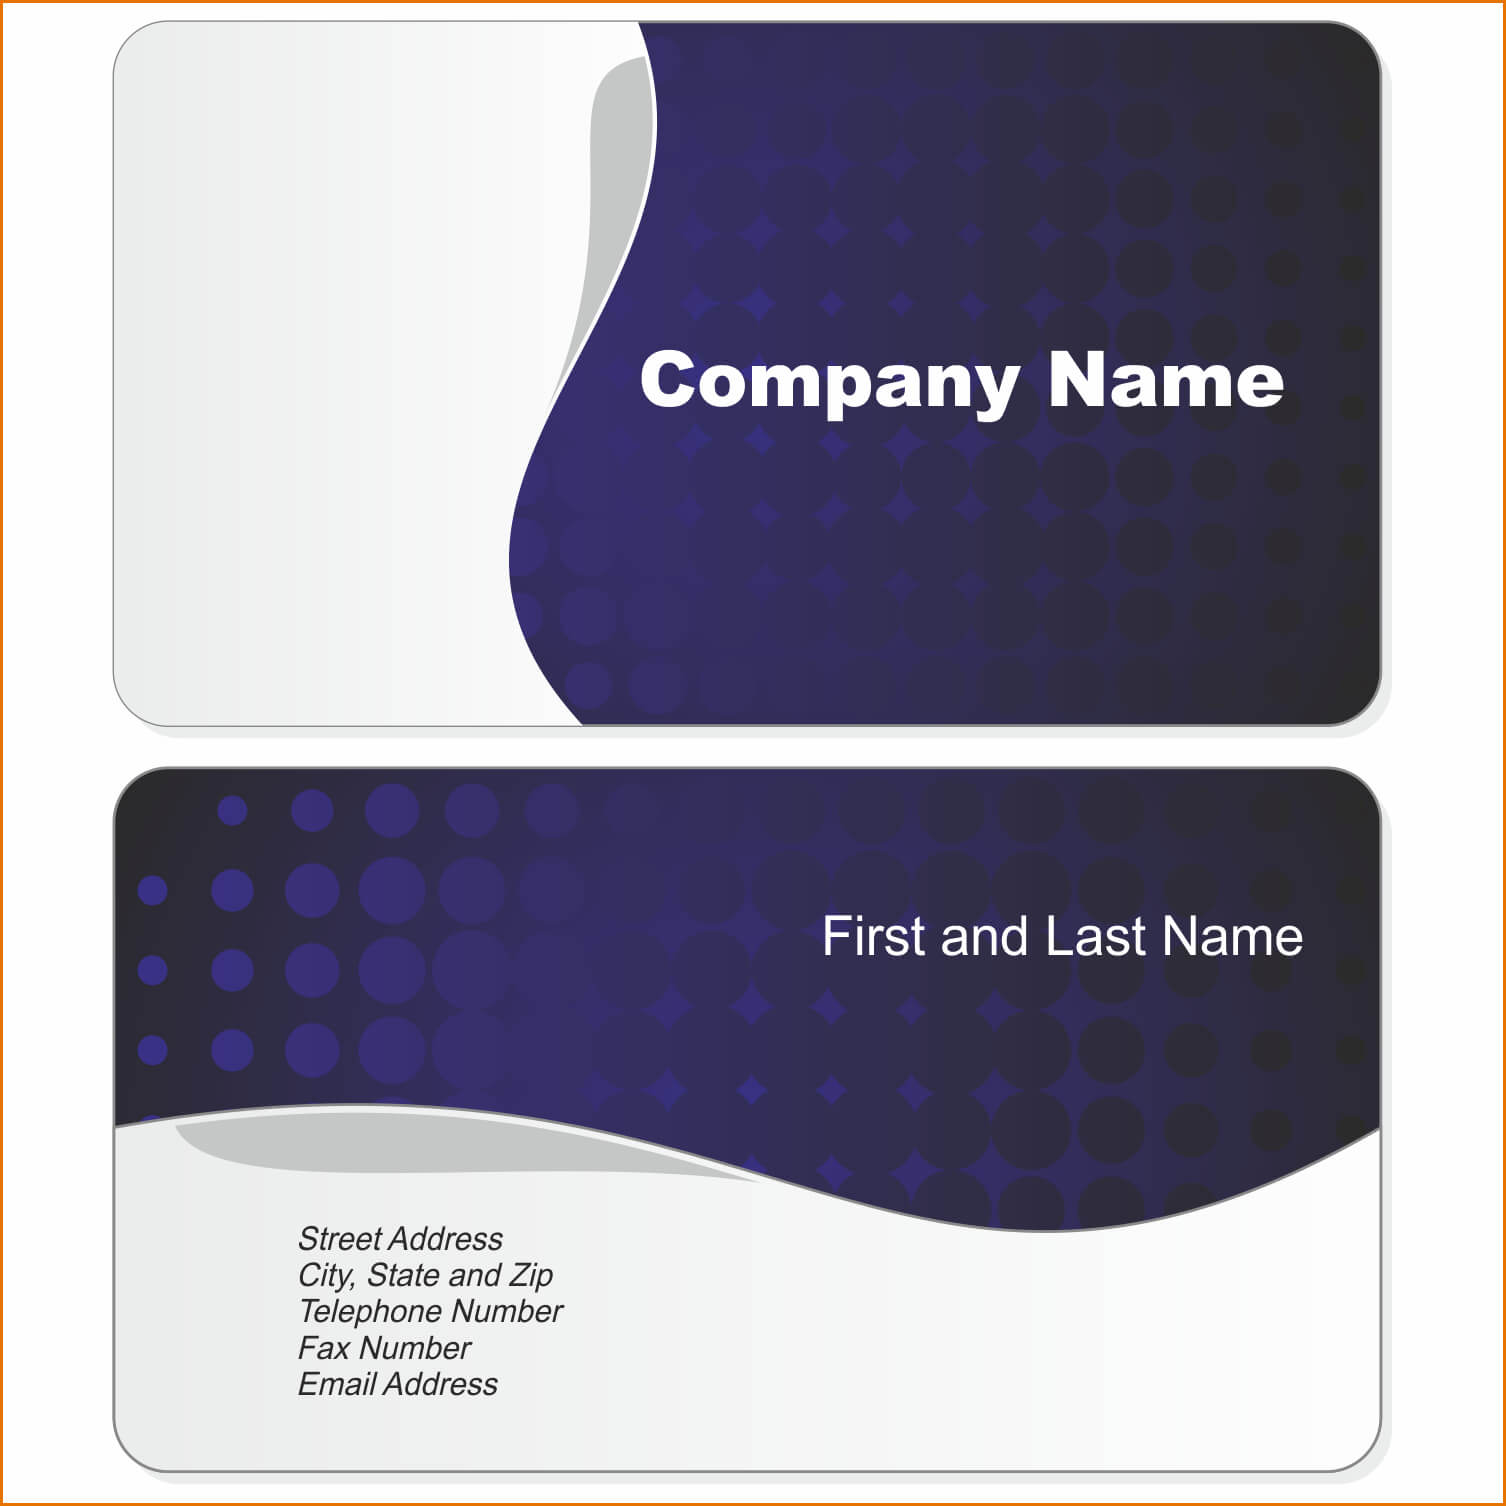 Microsoft Word Blank Business Card Templates Free For Sample With Regard To Business Card Template For Word 2007